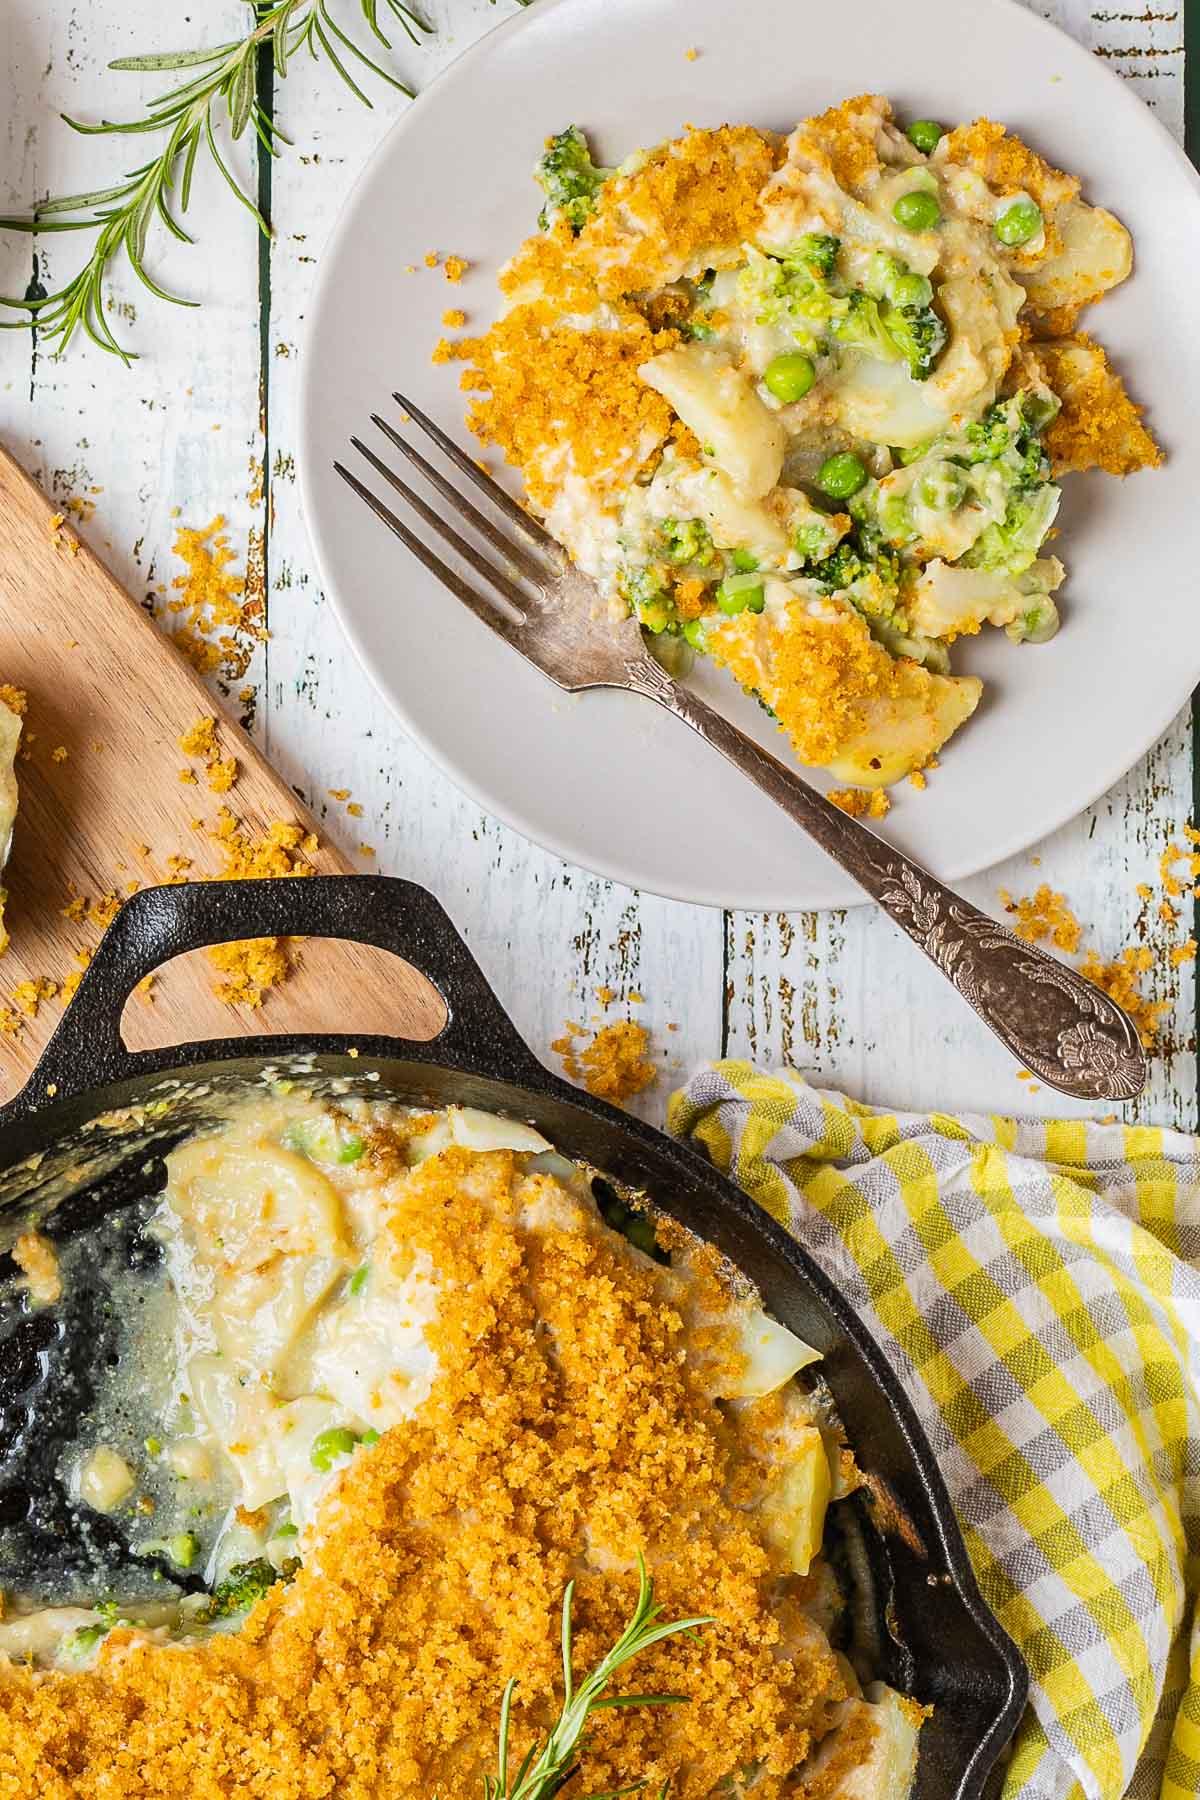 A black cast iron skillet with potato slices in a yellow thick sauce topped with yellow breadcrumbs. A part of it is missing and there is a gray plate with some food on it where you can see peas and broccoli as well.